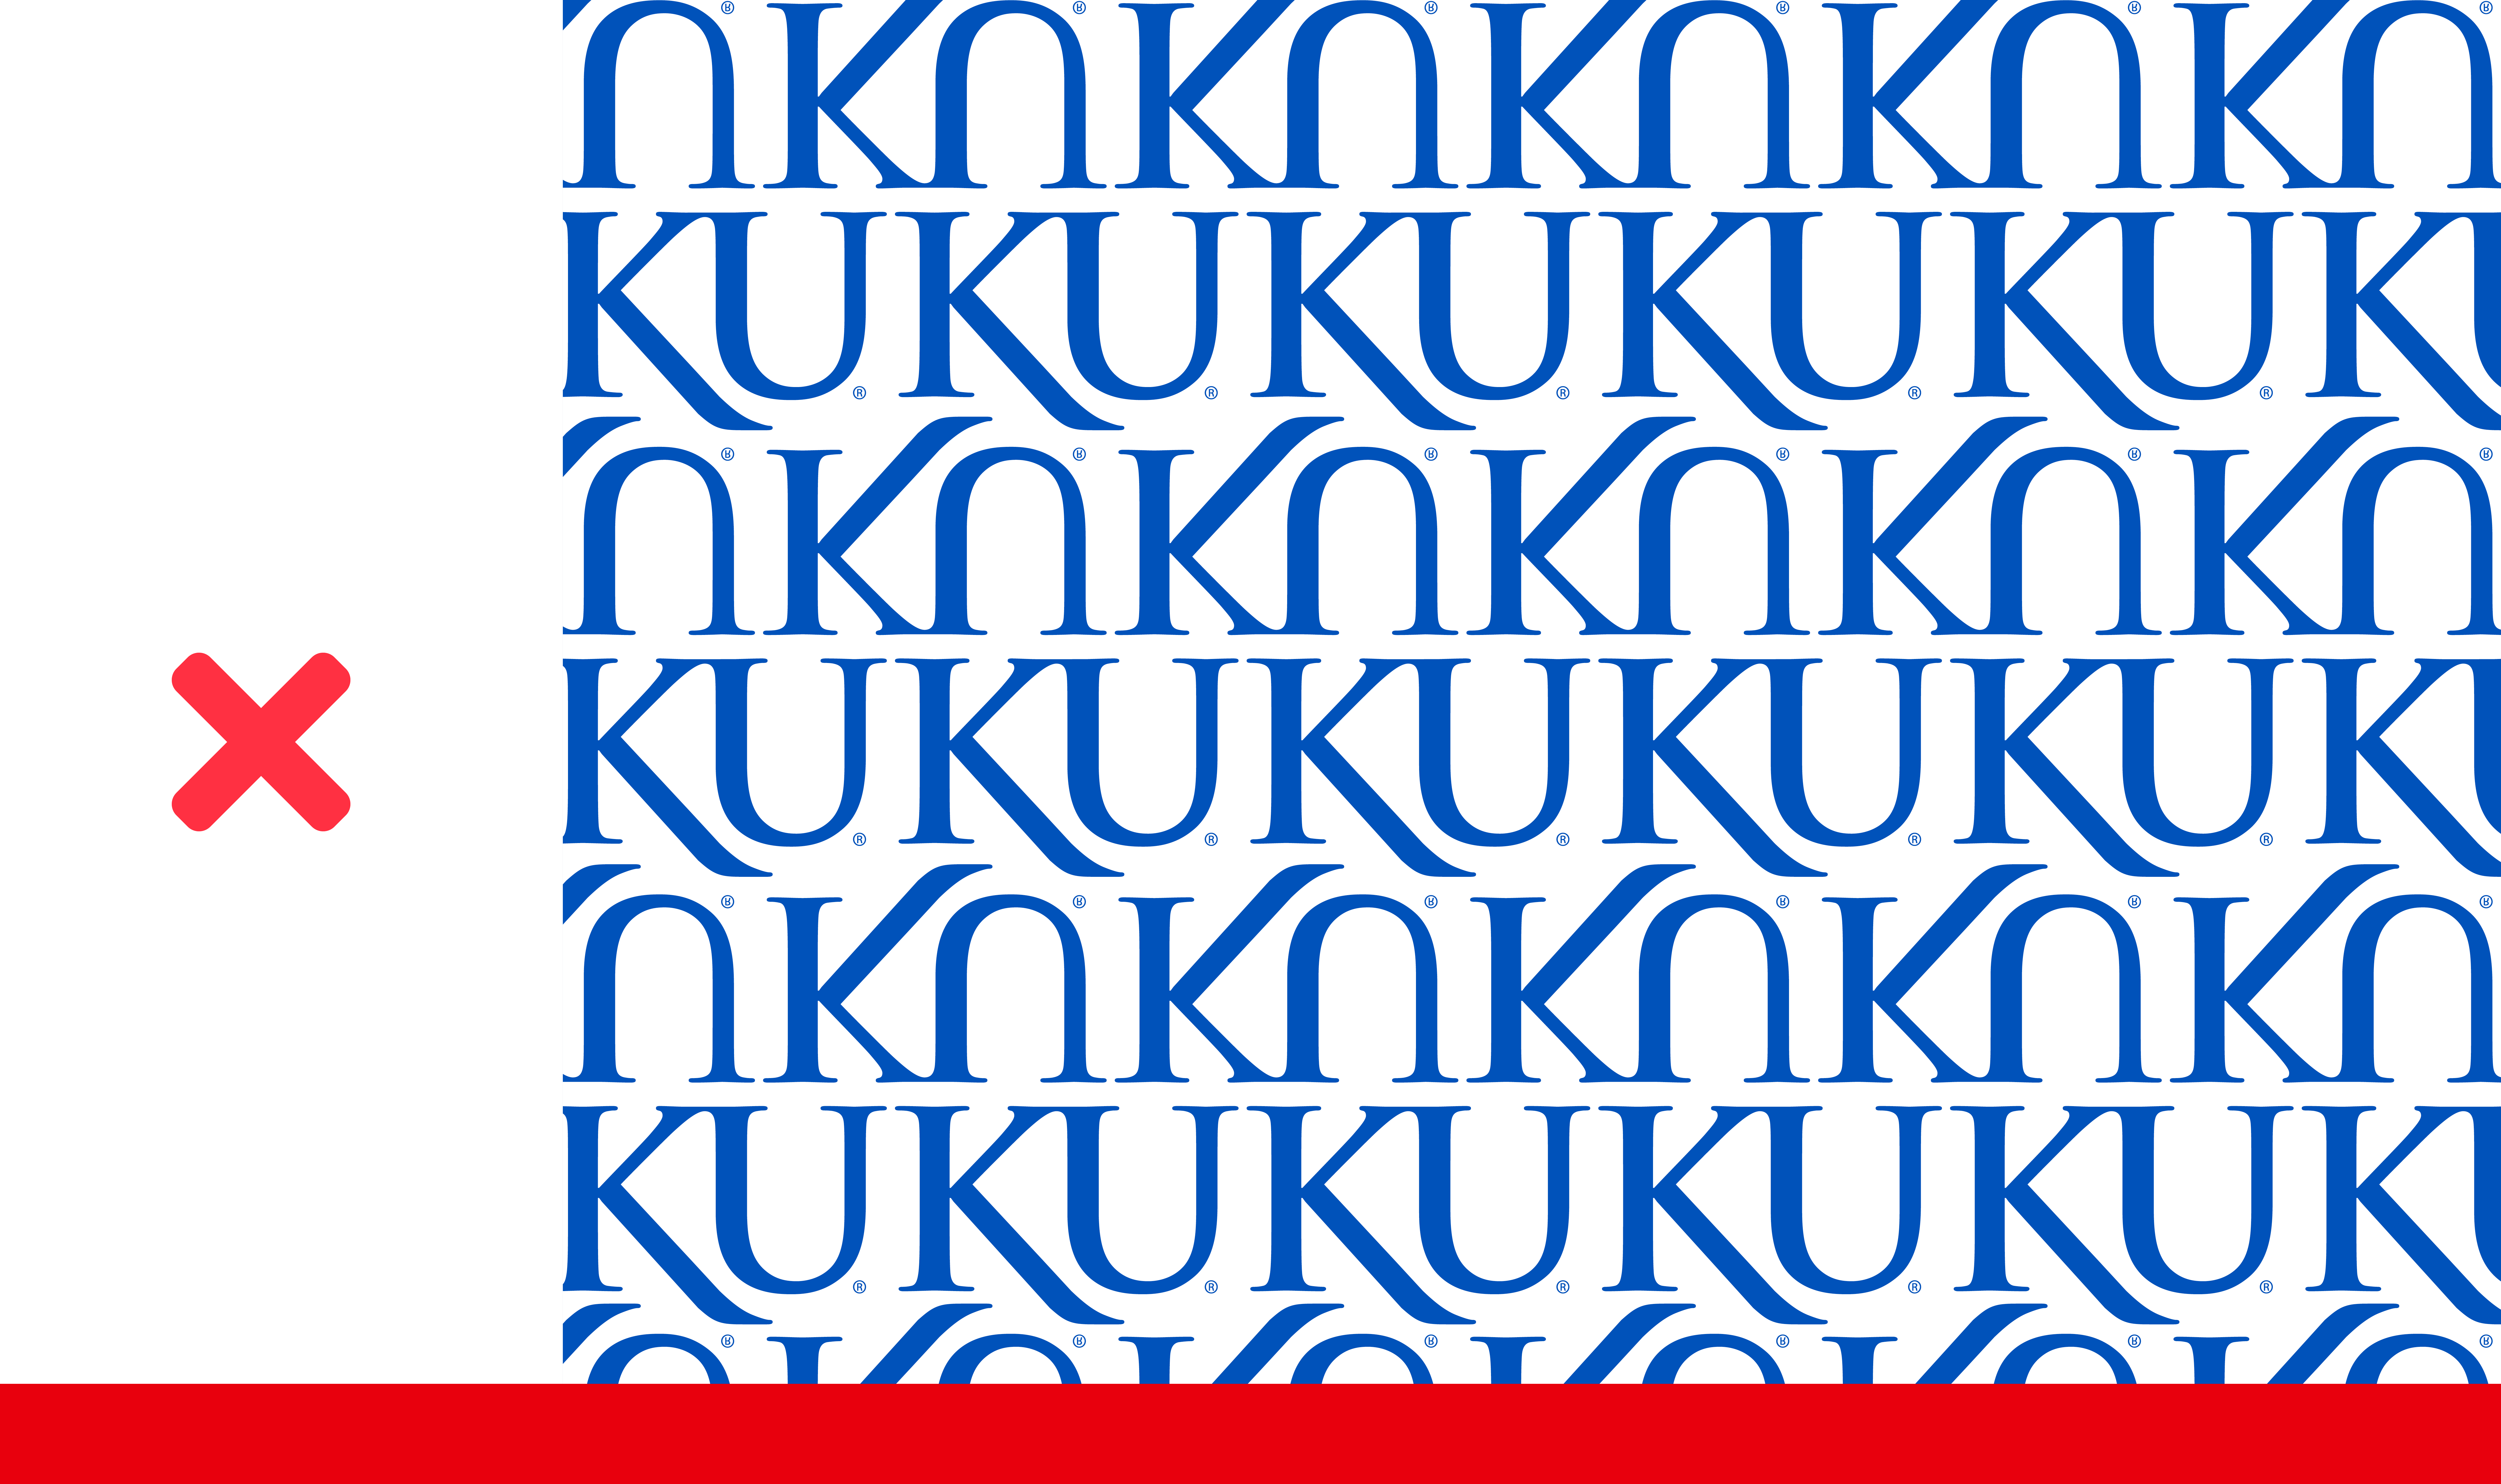 Invalid example of the KU logo repeated and flipped to make a pattern.